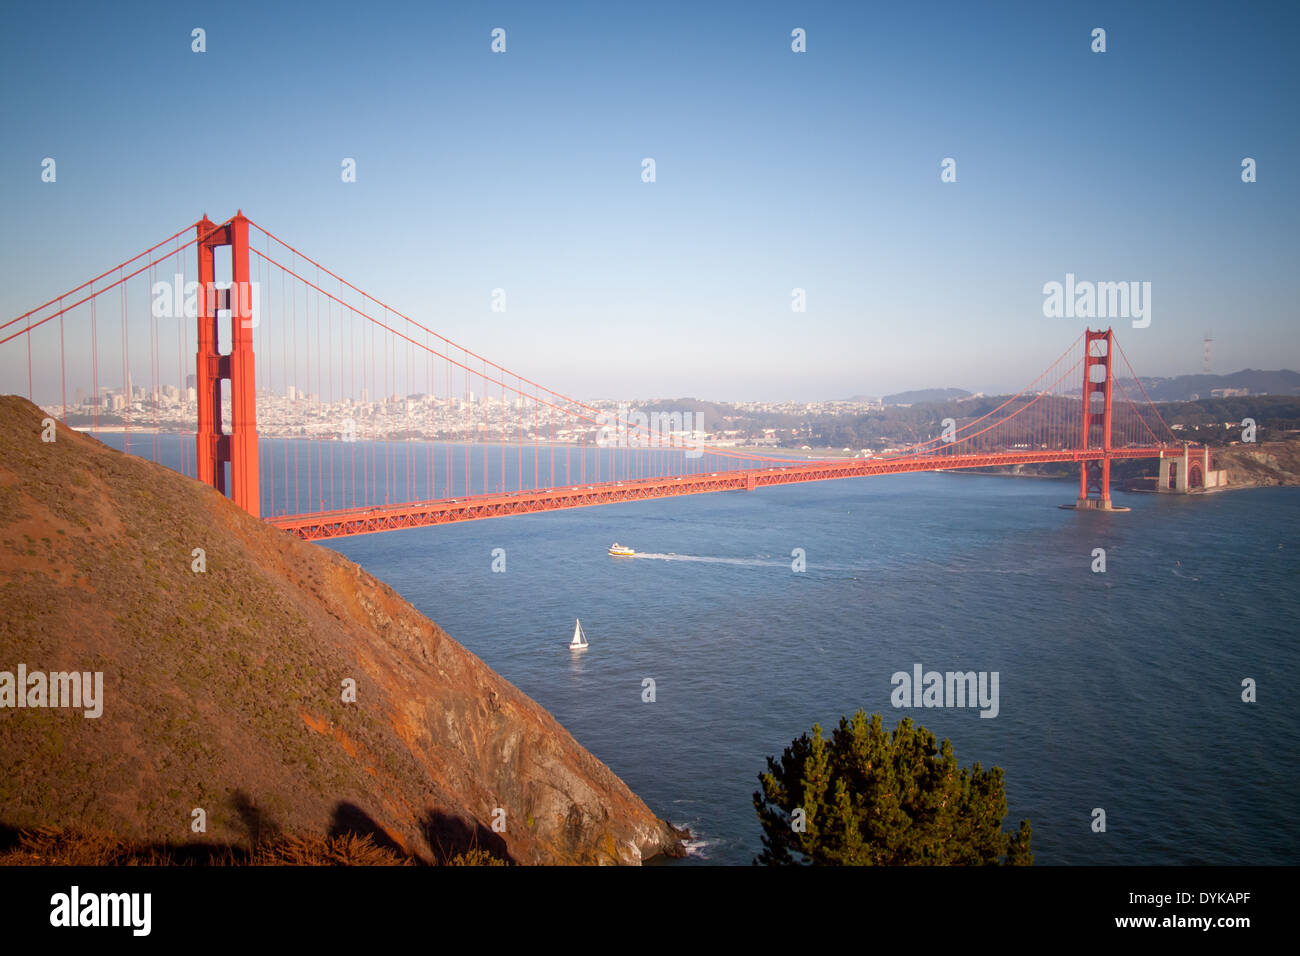 An aerial view of the Golden Gate Bridge as seen from Marin County, California.  San Francisco is in the distance. Stock Photo